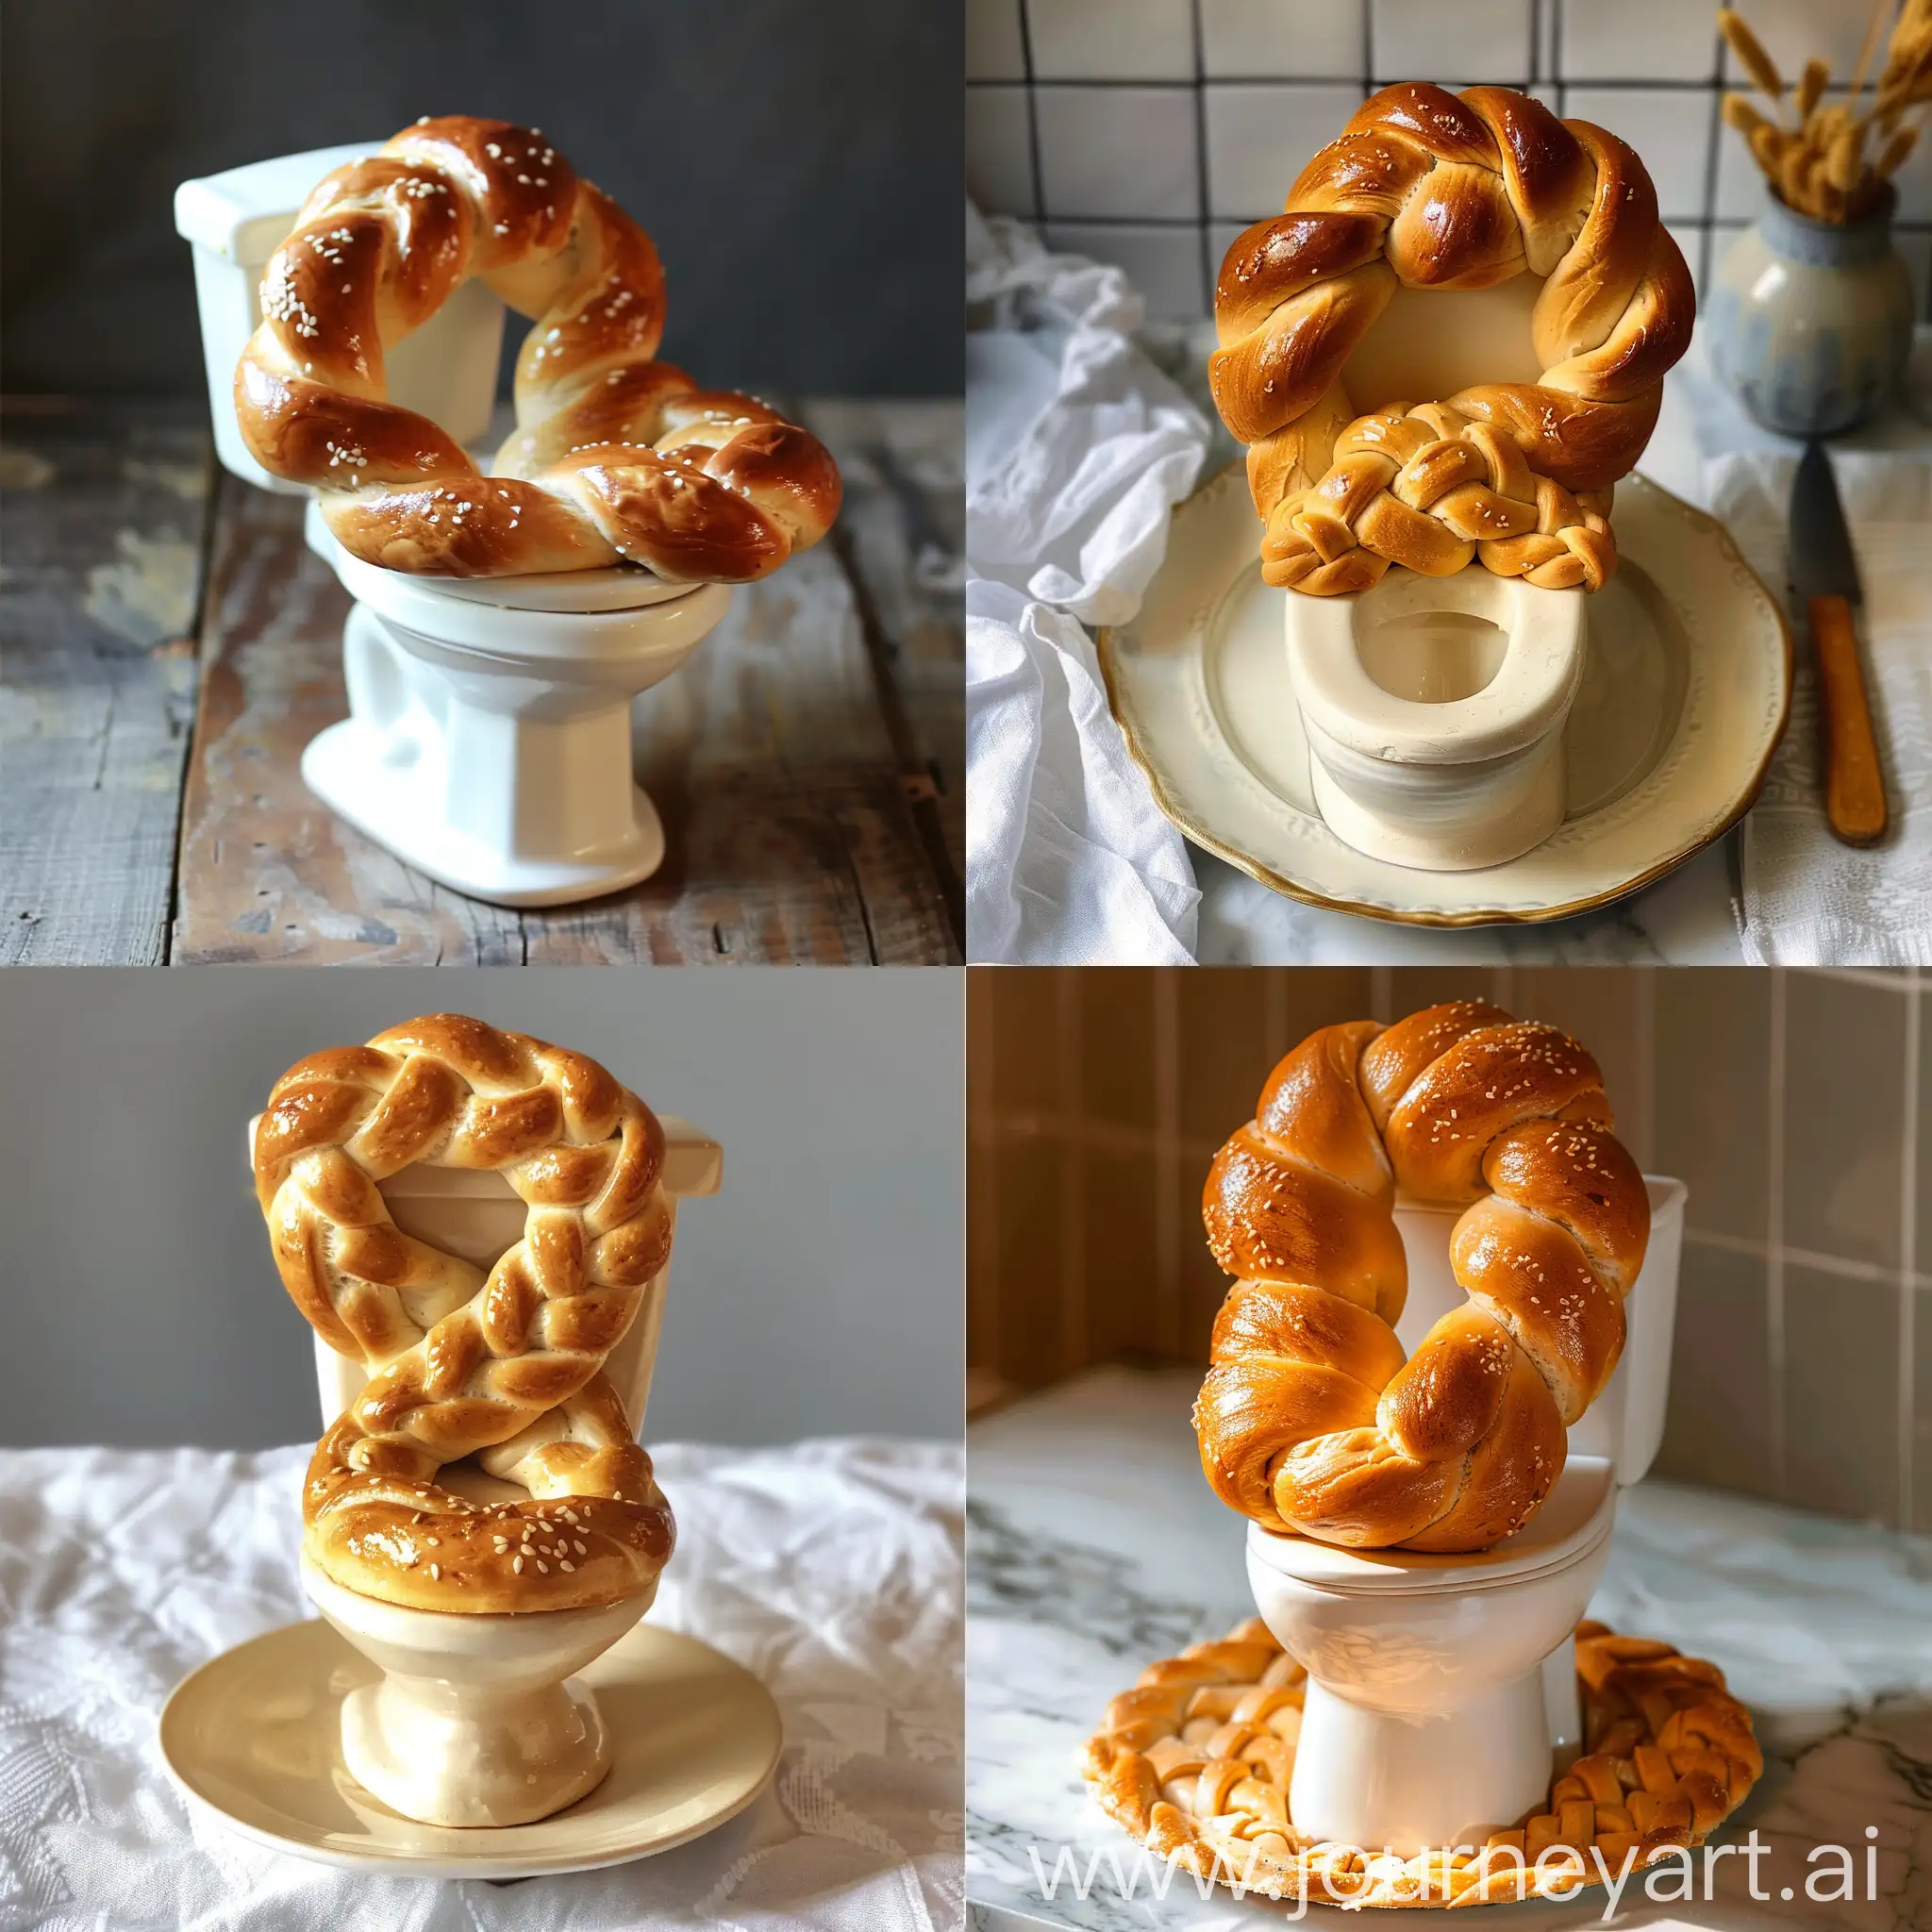 A challah in the shape of a toilet
